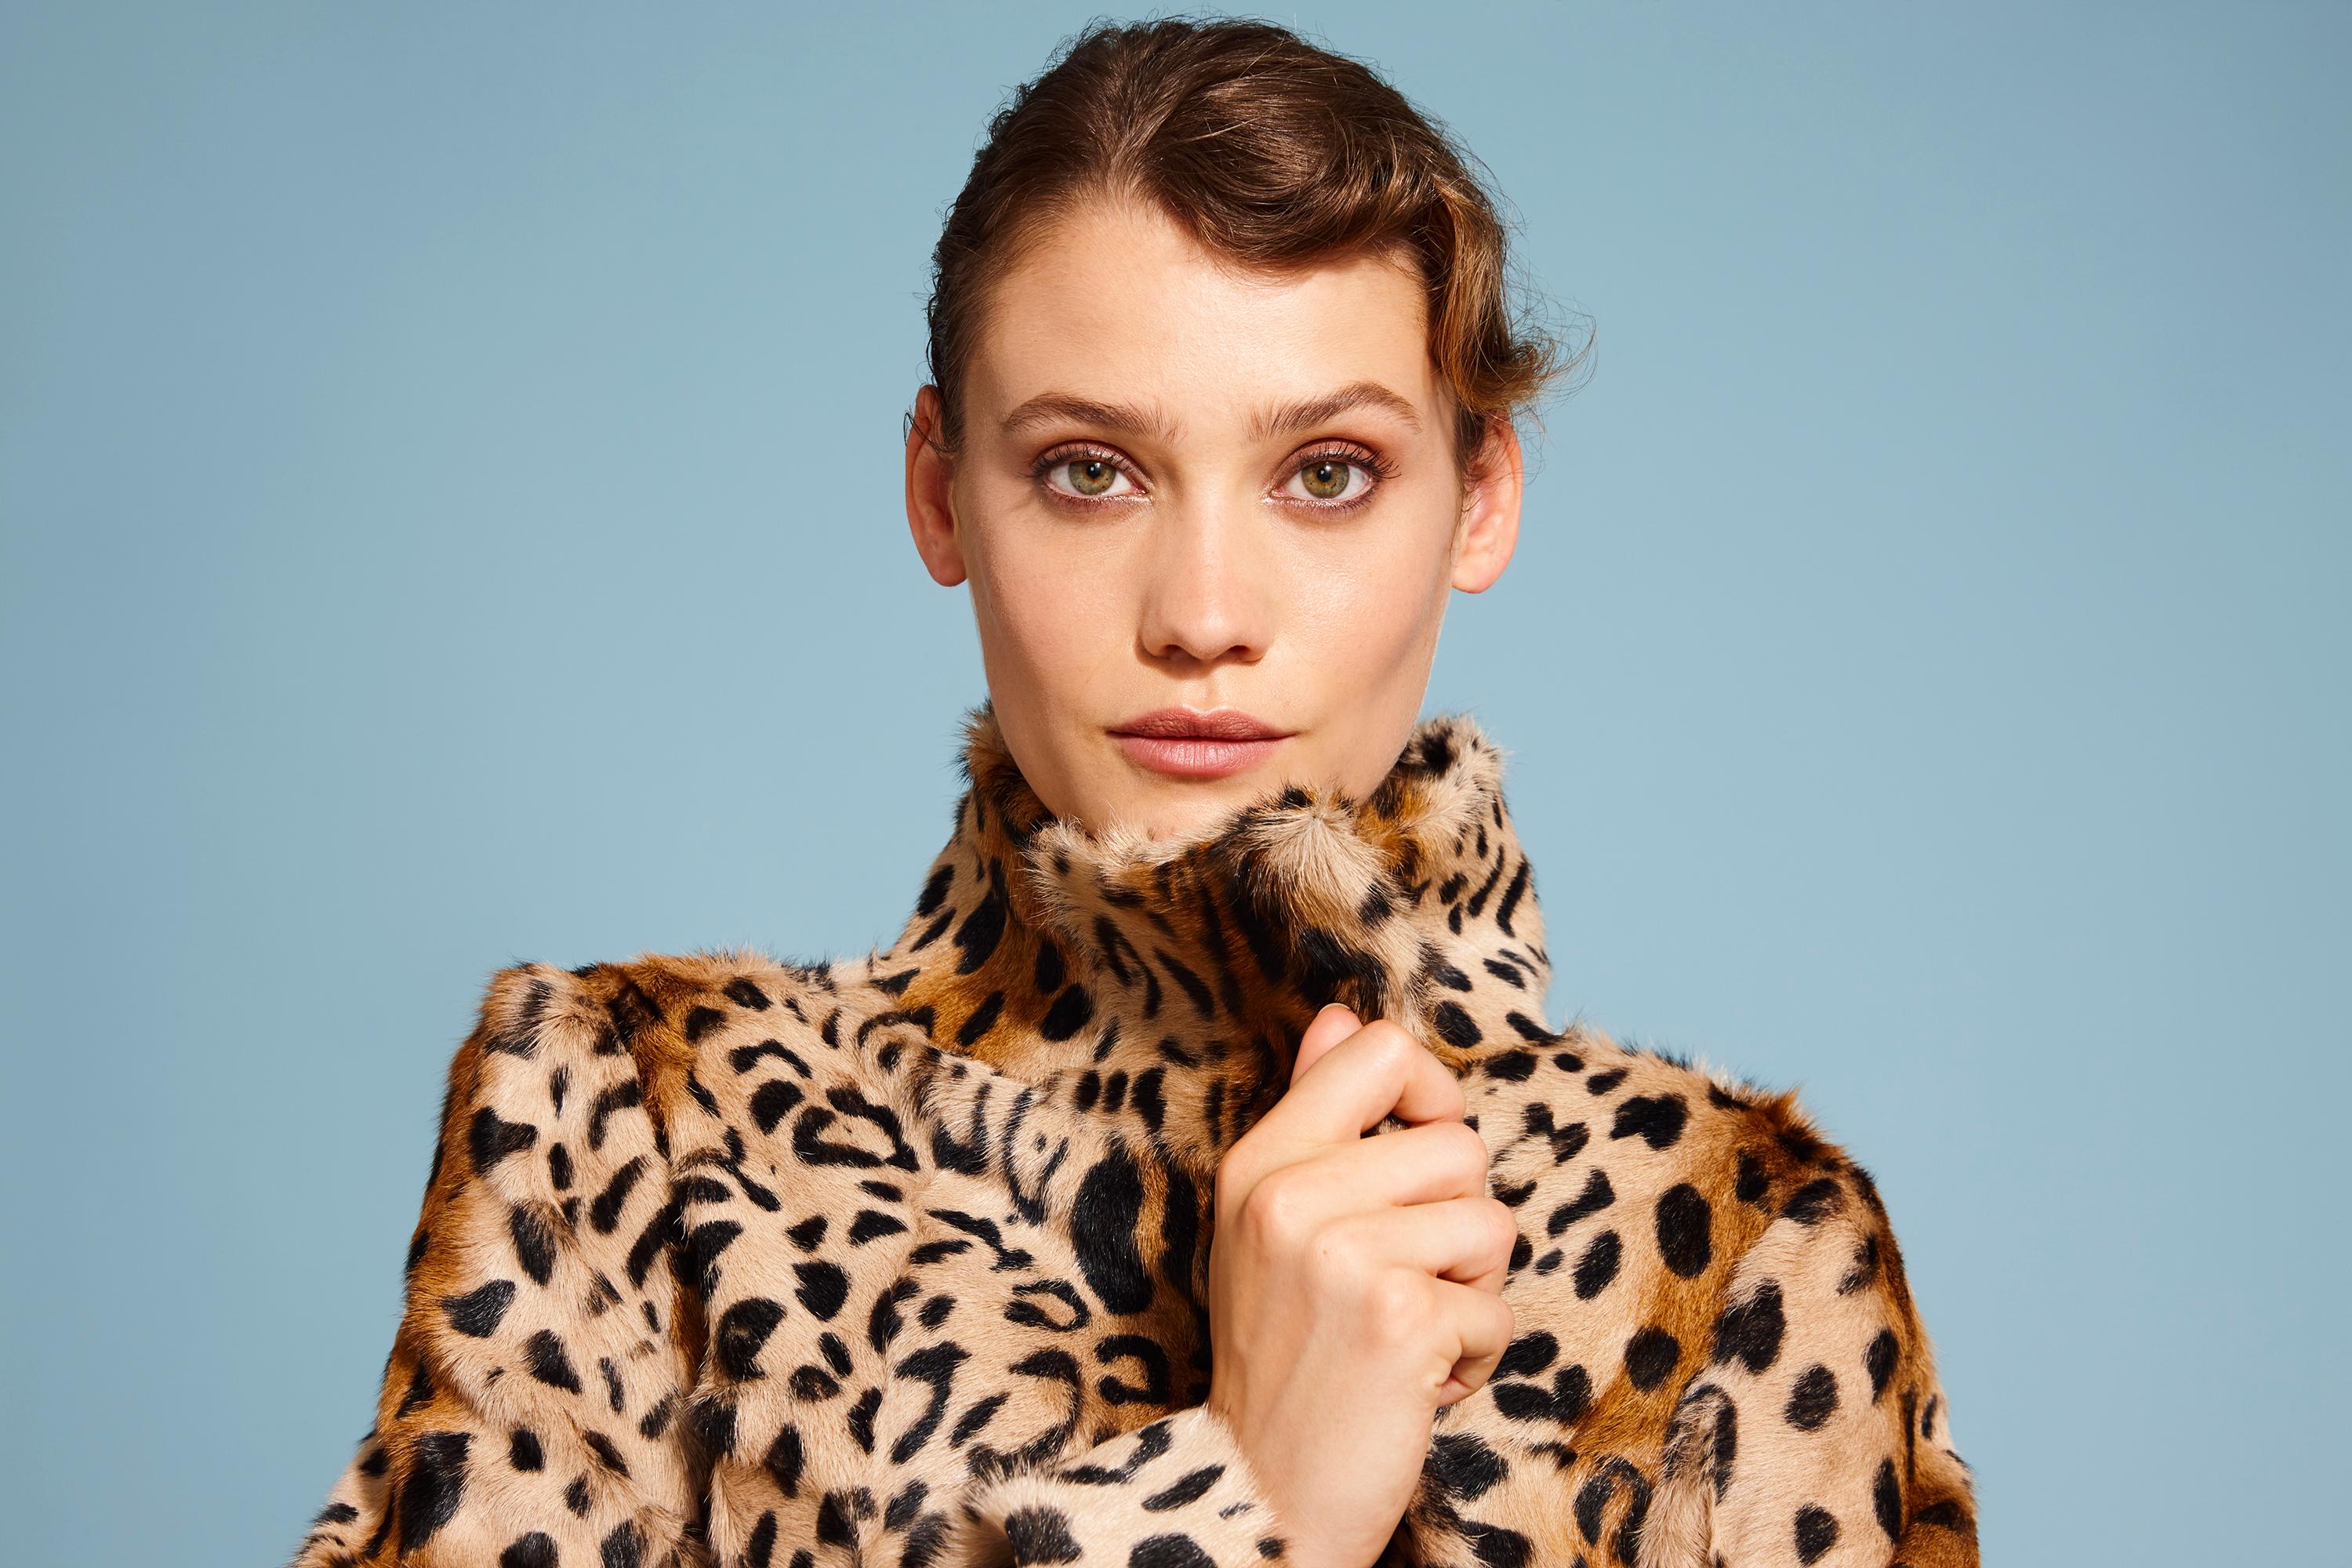 This Leopard print coat is Verheyen London’s classic staple for effortless style and glamour.

A coat for dressing up and down with jeans or a dress.

PRODUCT DETAILS

High Collar Leopard Print Coat

Size: UK 14
Colour: Natural

Dyed Printed Goat